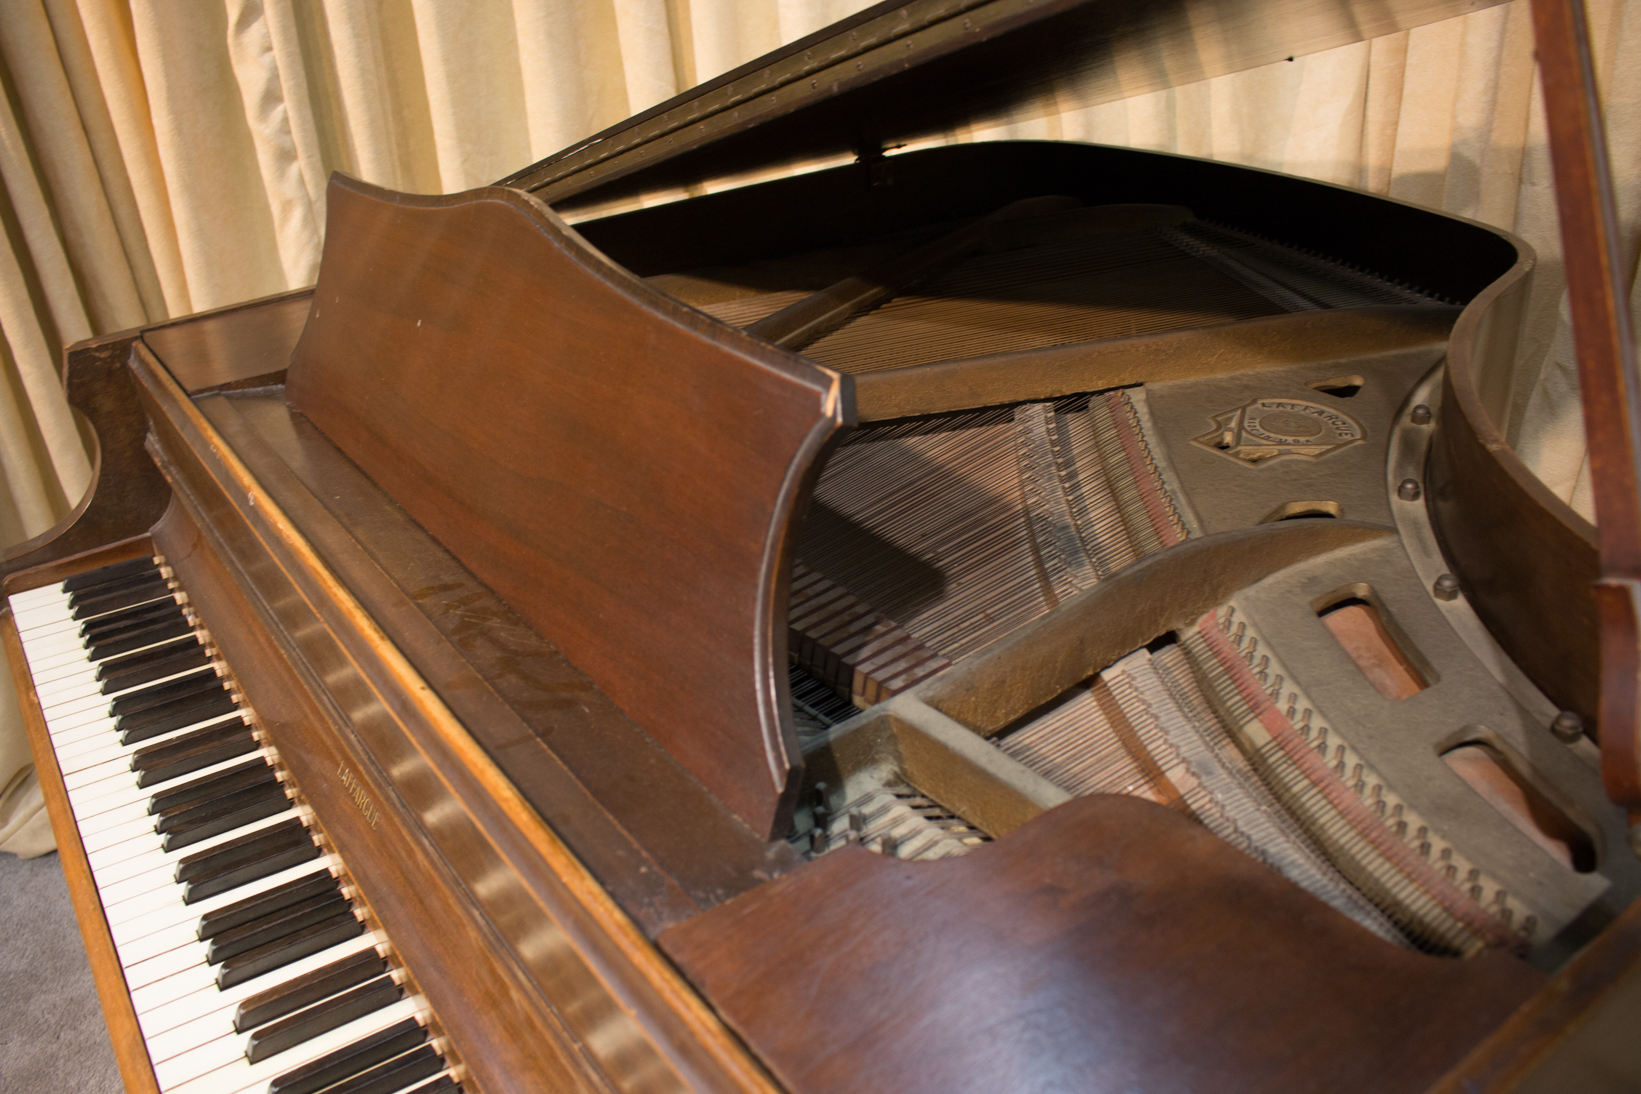 Laffargue Apartment Size Baby Grand Piano in the historic “William & Mary” style Antique Piano